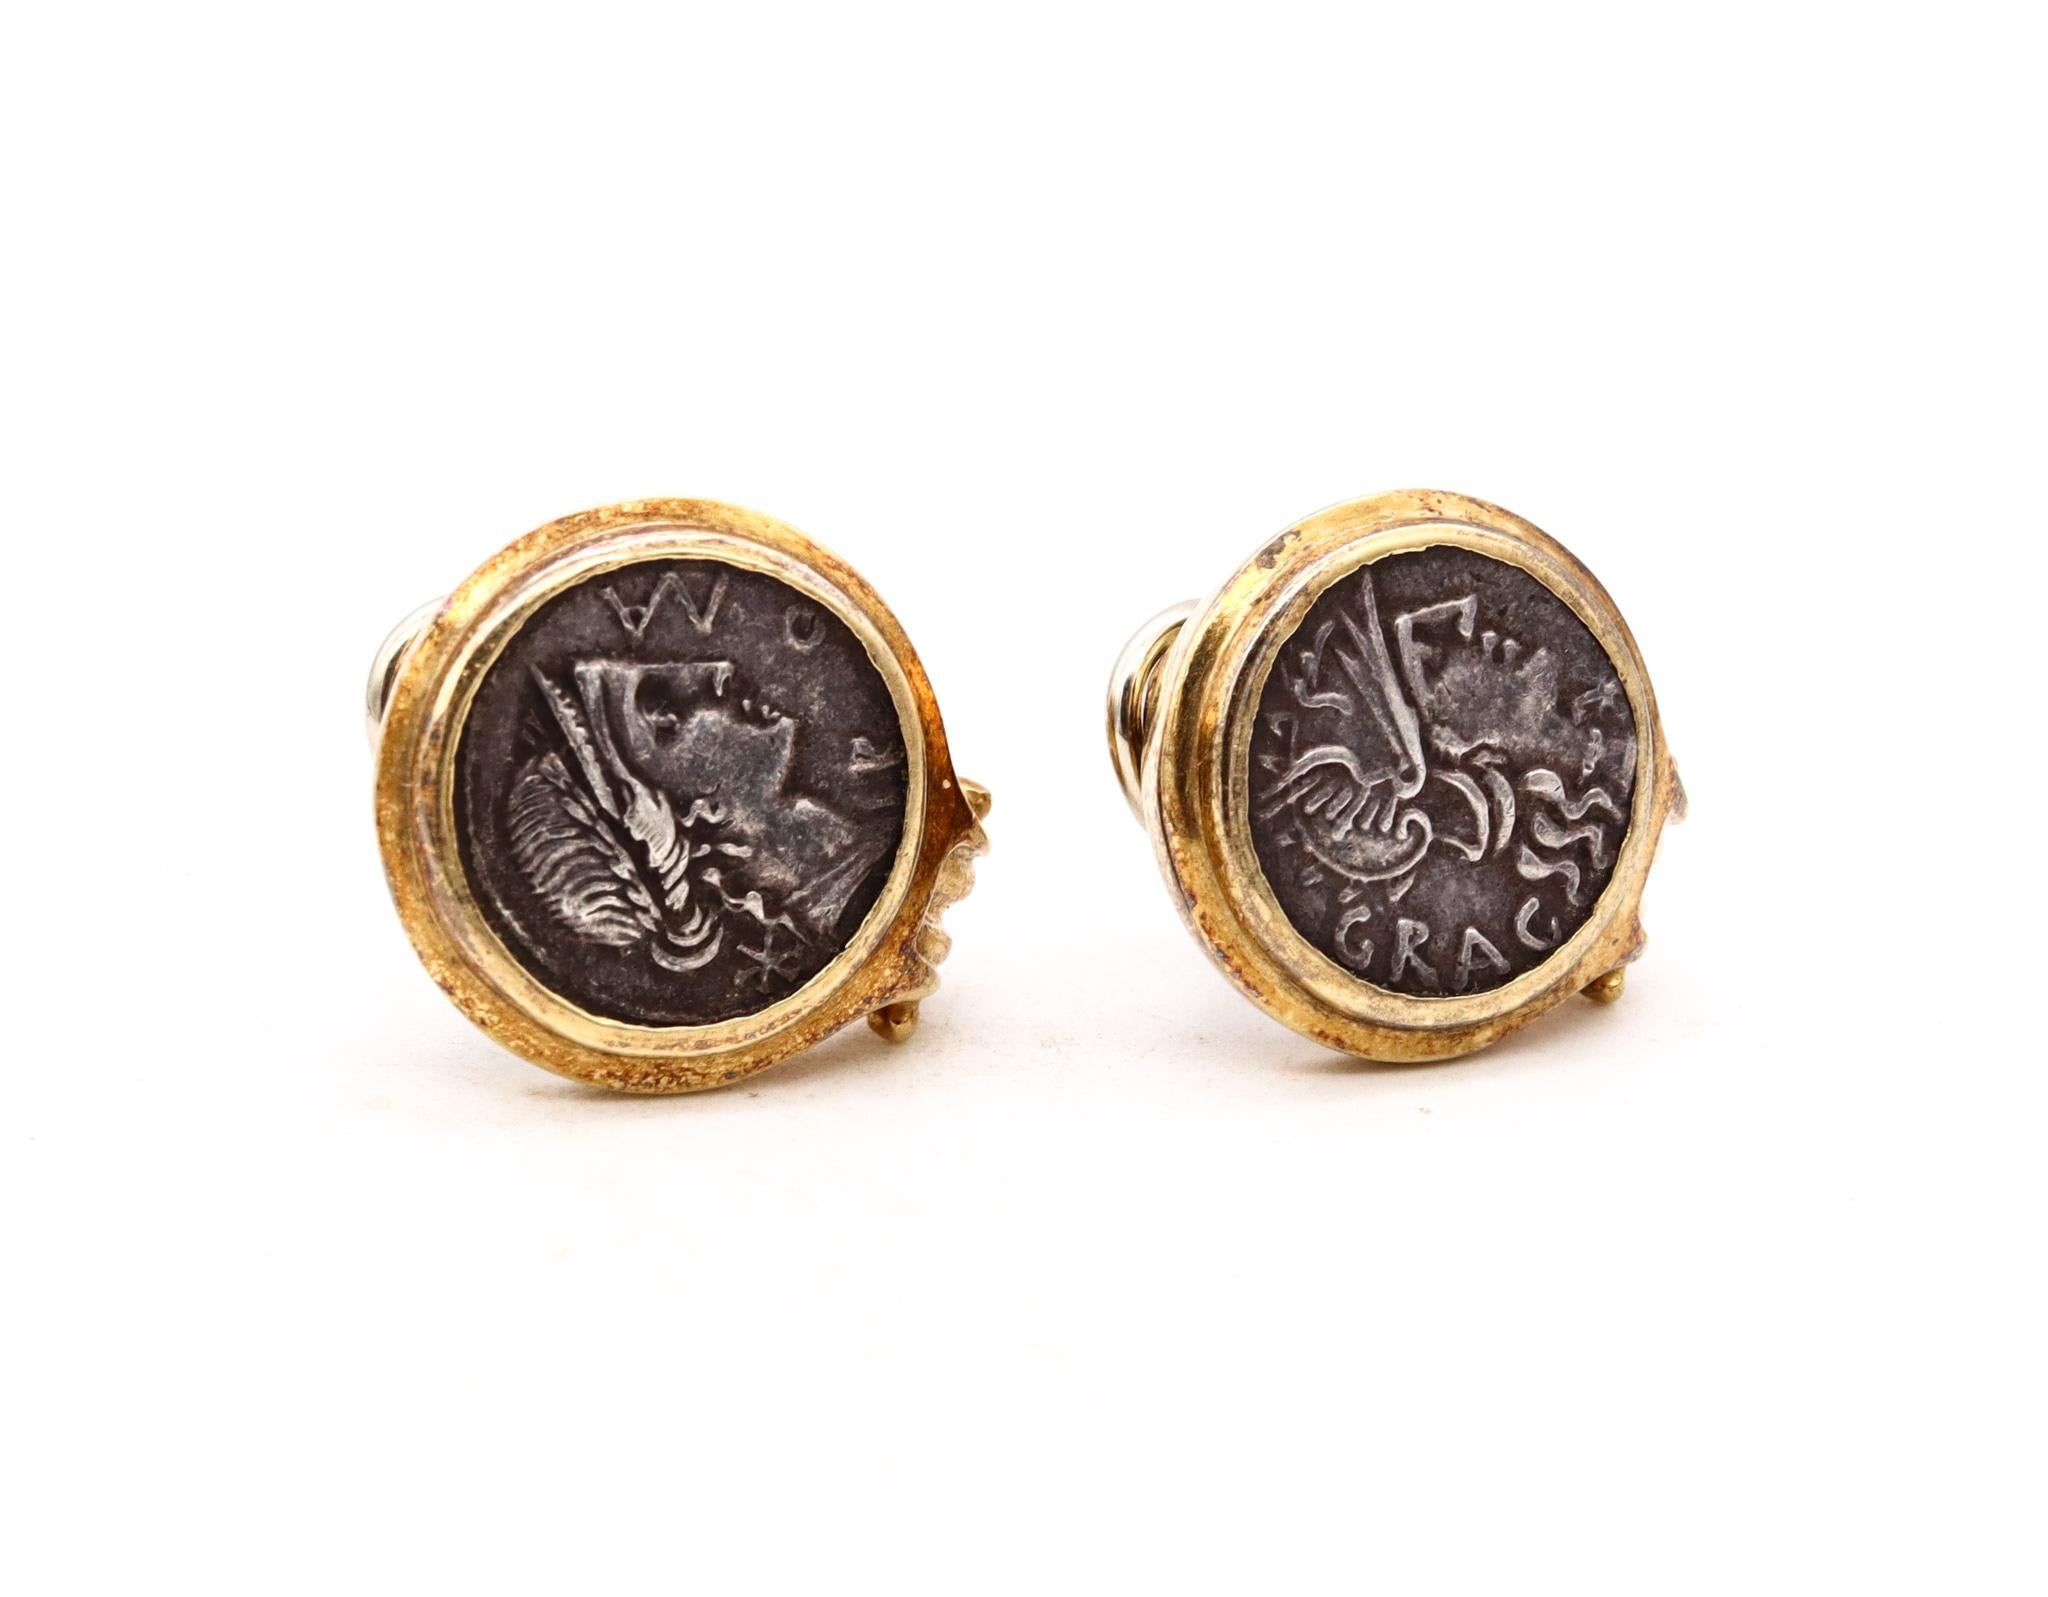 Women's Ancient Roman Coin Earrings in 18kt Yellow Gold with 136-114 BC Silver Denarius